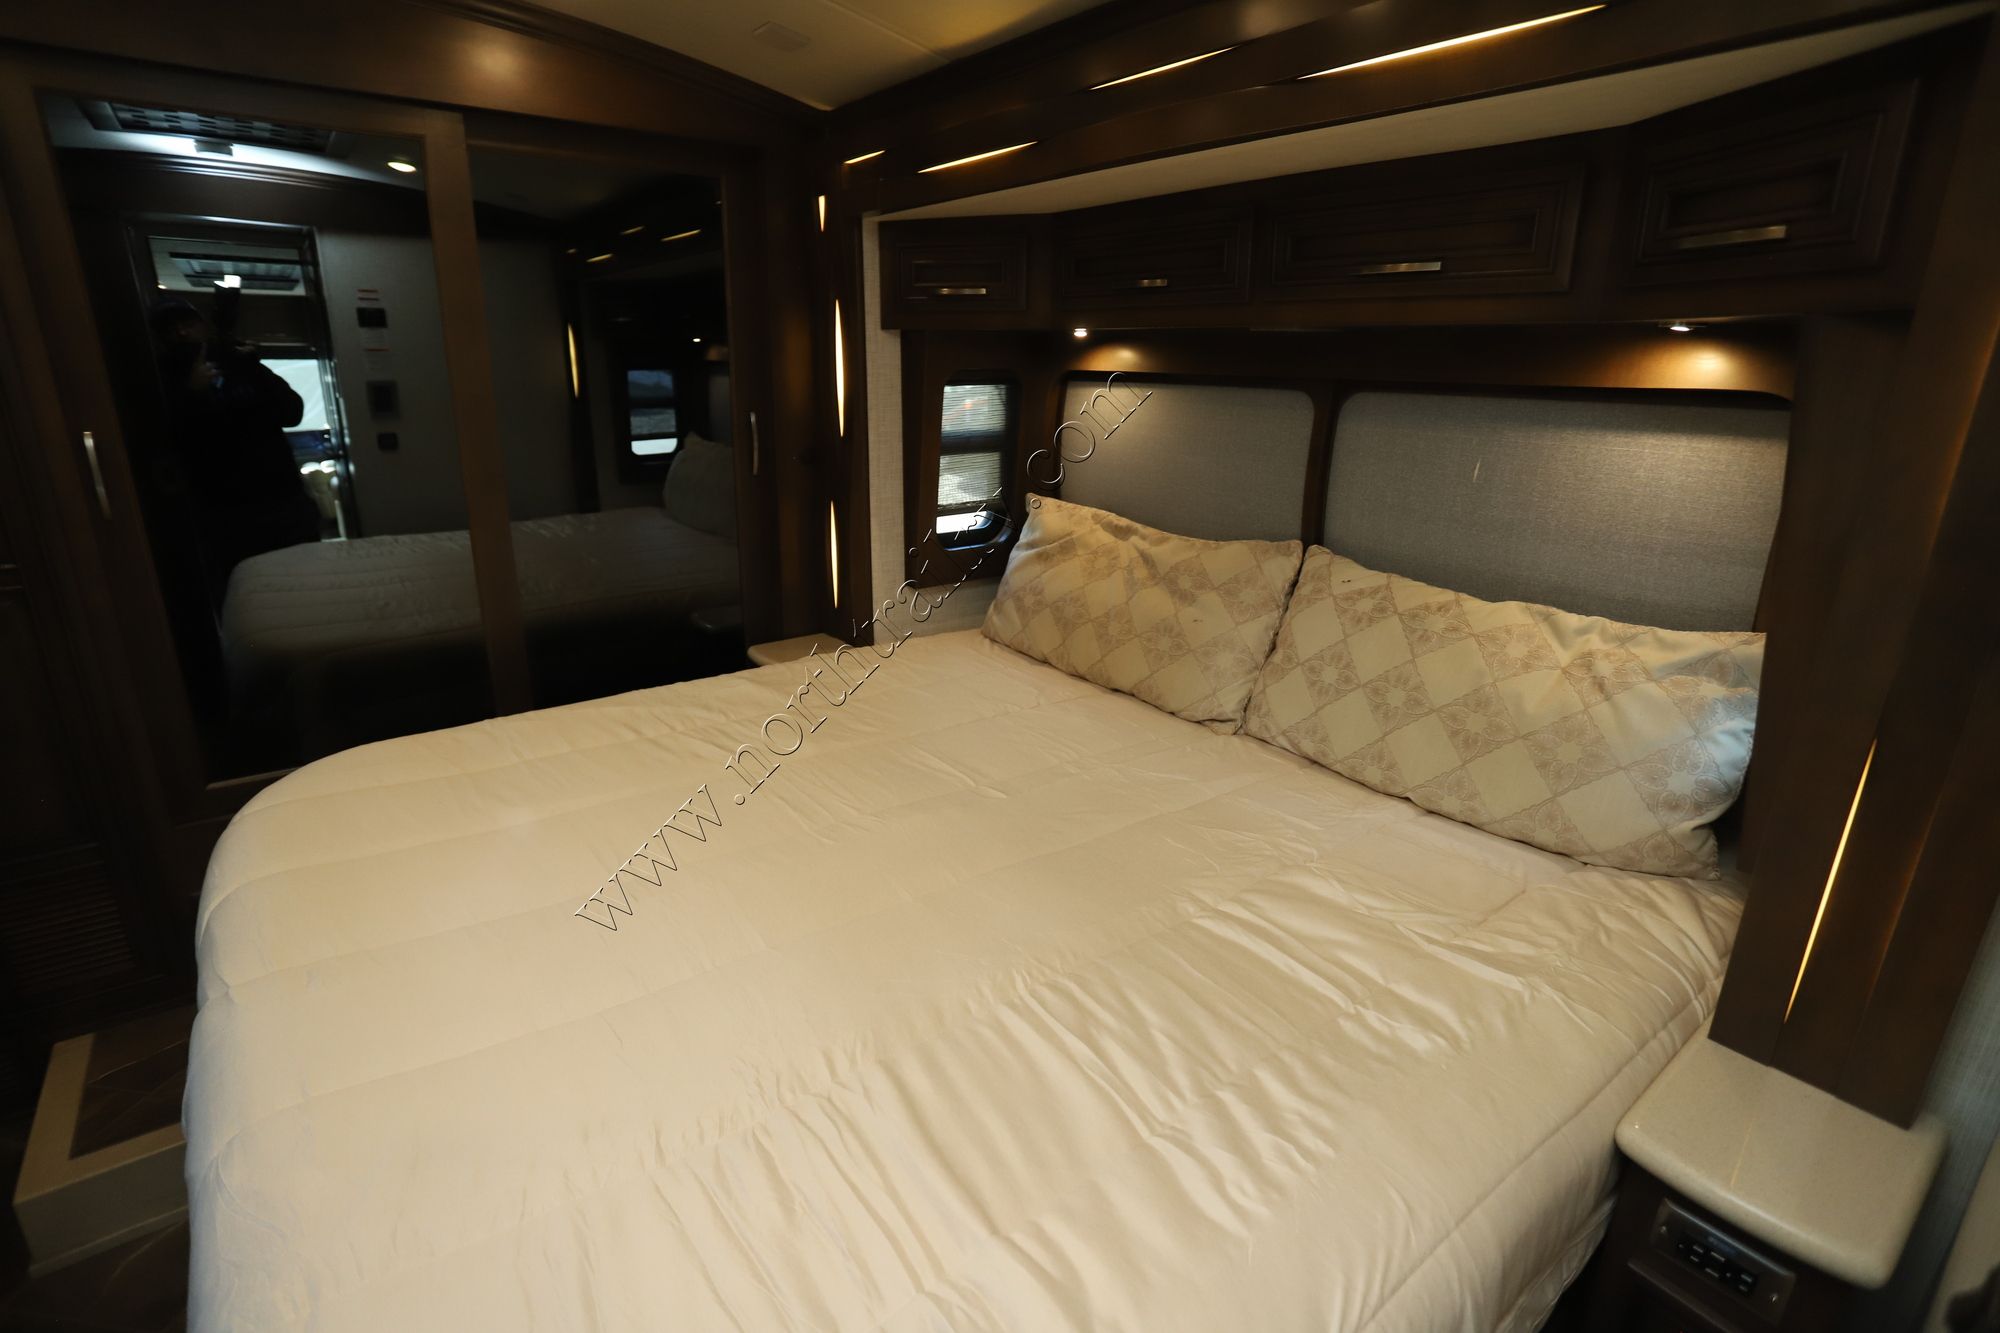 Used 2020 Newmar New Aire 3541 Class A  For Sale